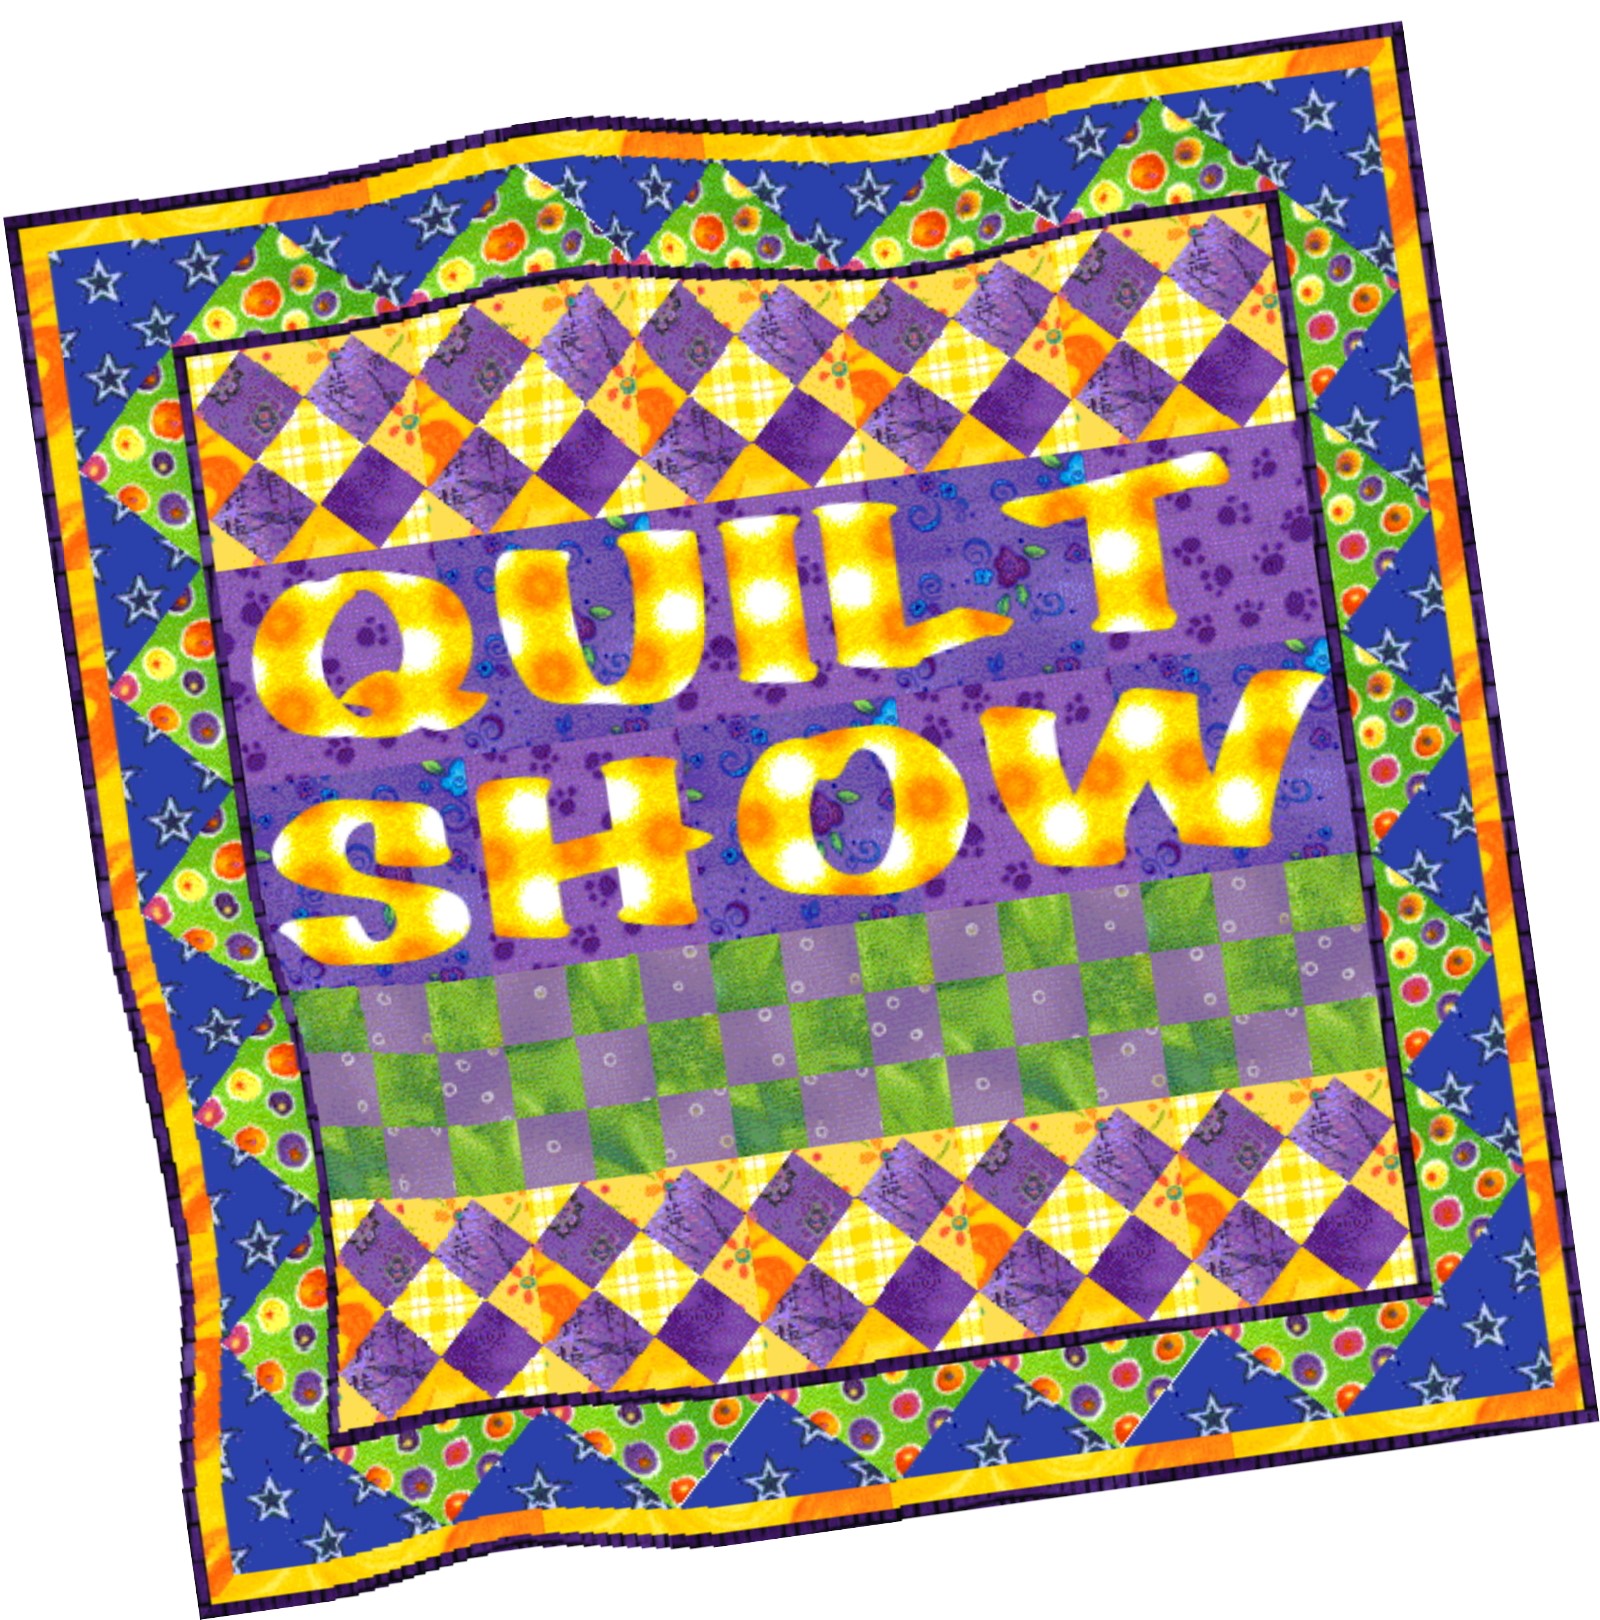 quilters clipart - photo #26